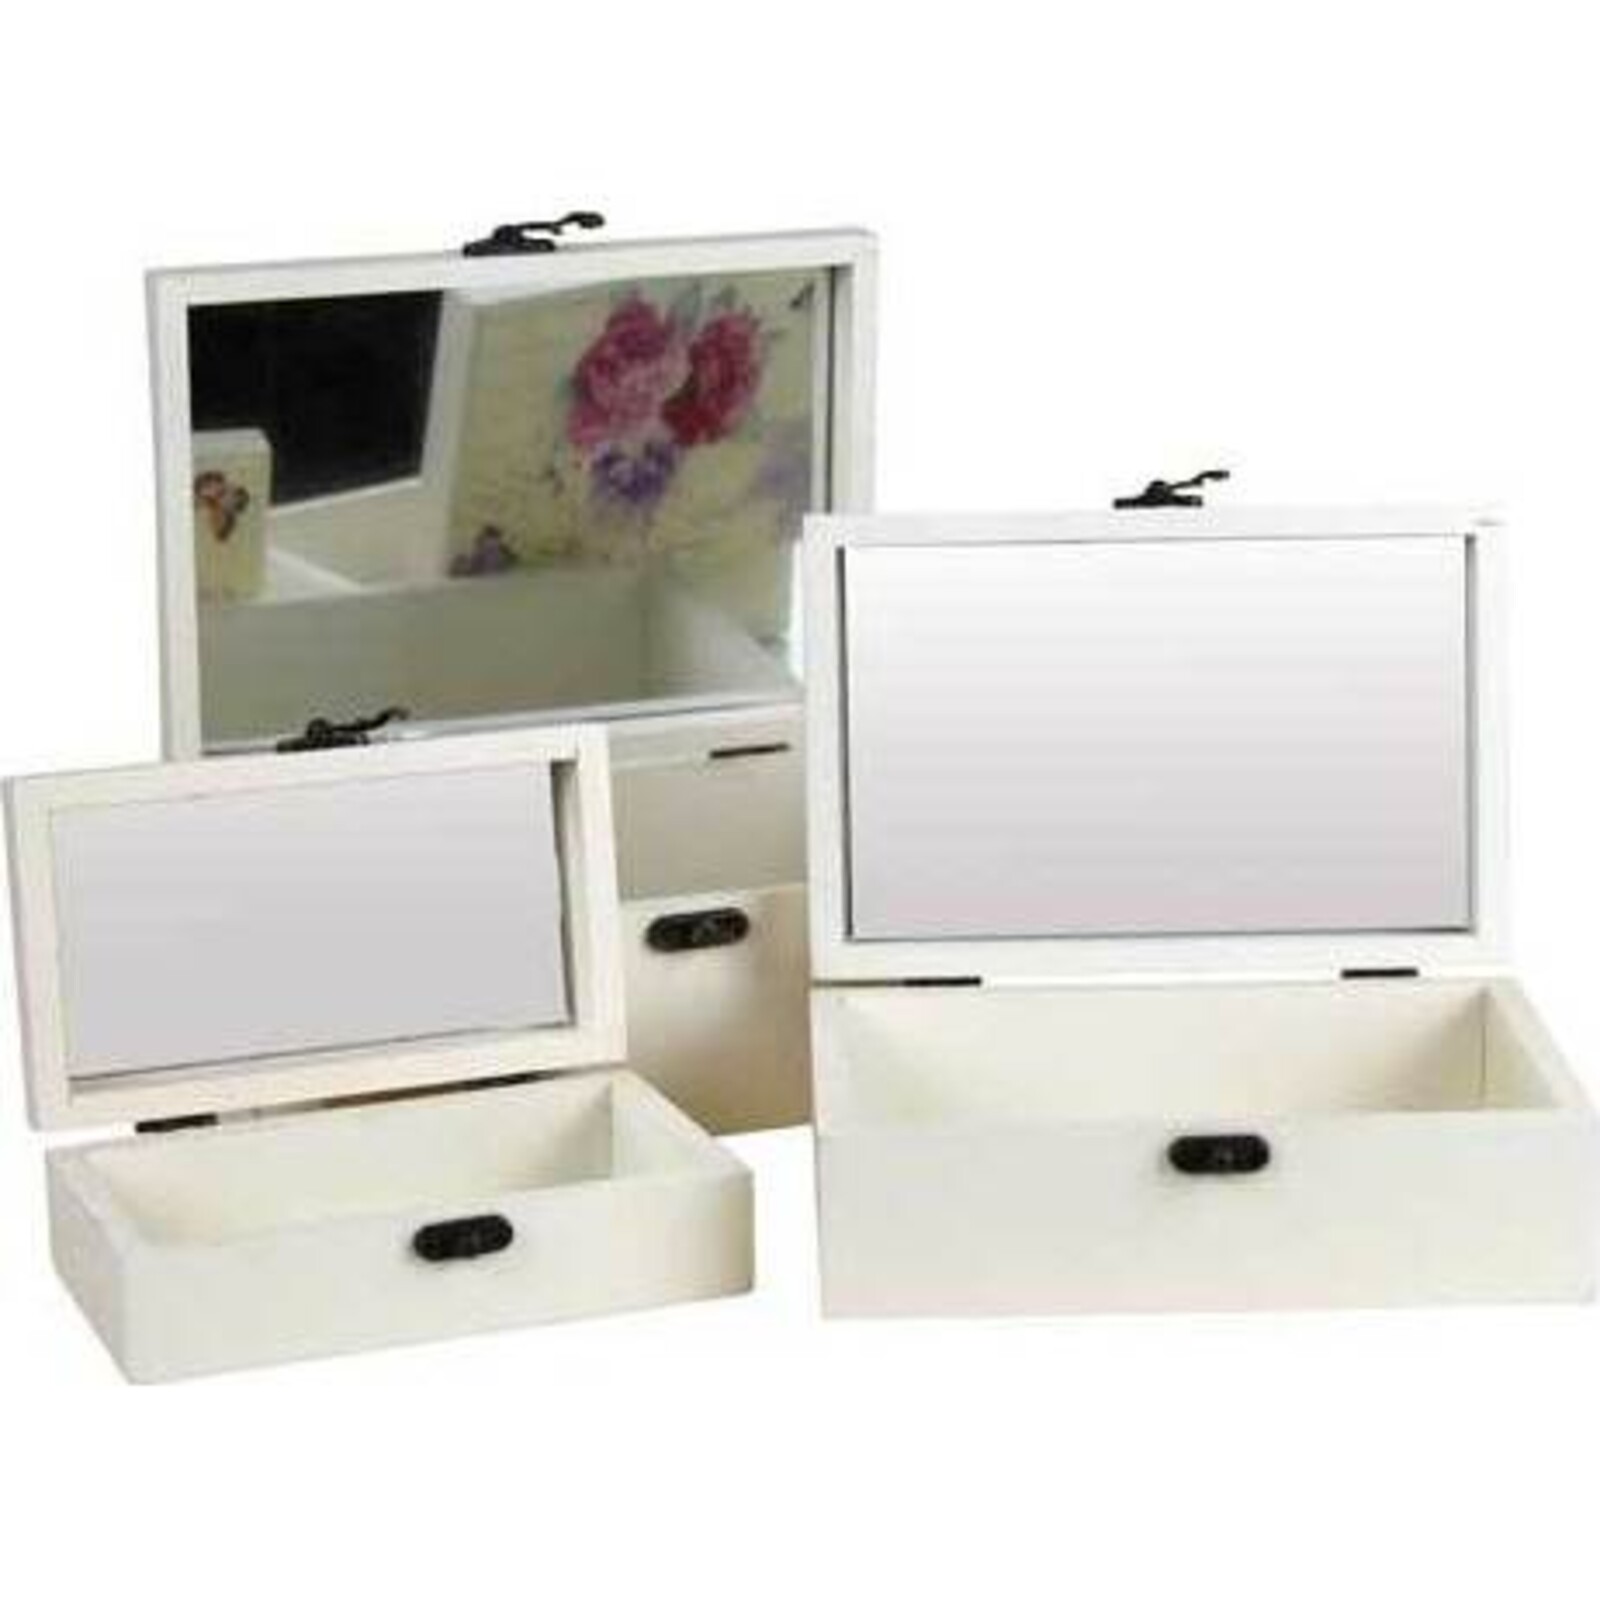 Jewellery Box Floral Butterfly S/3